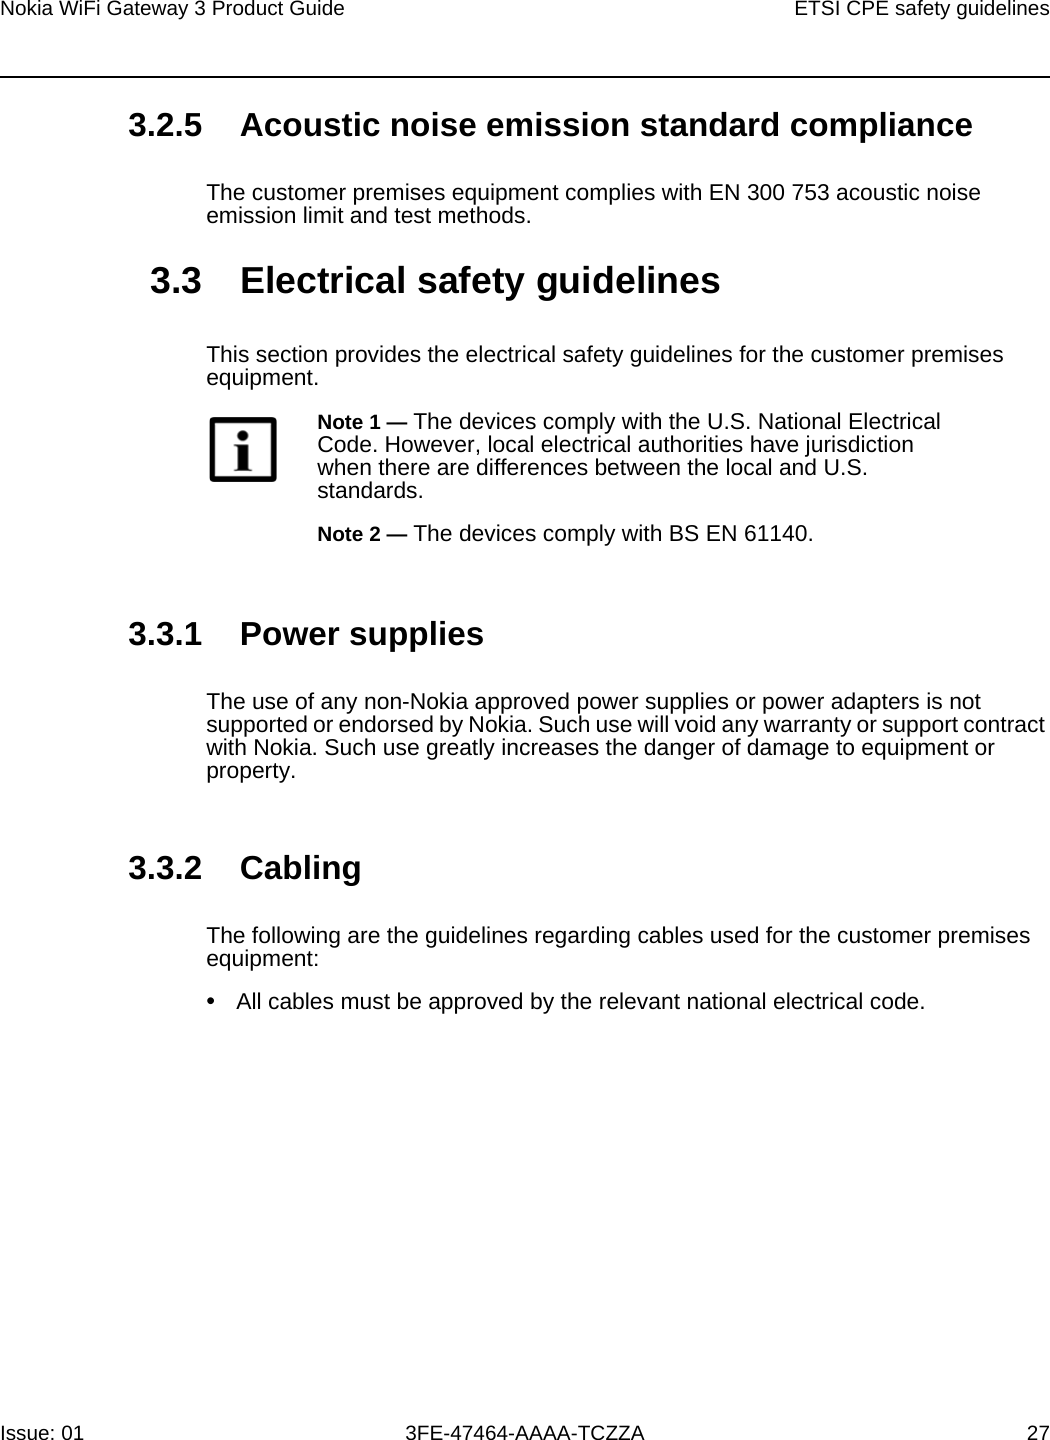 Nokia WiFi Gateway 3 Product Guide ETSI CPE safety guidelinesIssue: 01 3FE-47464-AAAA-TCZZA 27 3.2.5 Acoustic noise emission standard complianceThe customer premises equipment complies with EN 300 753 acoustic noise emission limit and test methods. 3.3 Electrical safety guidelinesThis section provides the electrical safety guidelines for the customer premises equipment.3.3.1 Power suppliesThe use of any non-Nokia approved power supplies or power adapters is not supported or endorsed by Nokia. Such use will void any warranty or support contract with Nokia. Such use greatly increases the danger of damage to equipment or property.3.3.2 CablingThe following are the guidelines regarding cables used for the customer premises equipment:•All cables must be approved by the relevant national electrical code.Note 1 — The devices comply with the U.S. National Electrical Code. However, local electrical authorities have jurisdiction when there are differences between the local and U.S. standards.Note 2 — The devices comply with BS EN 61140.